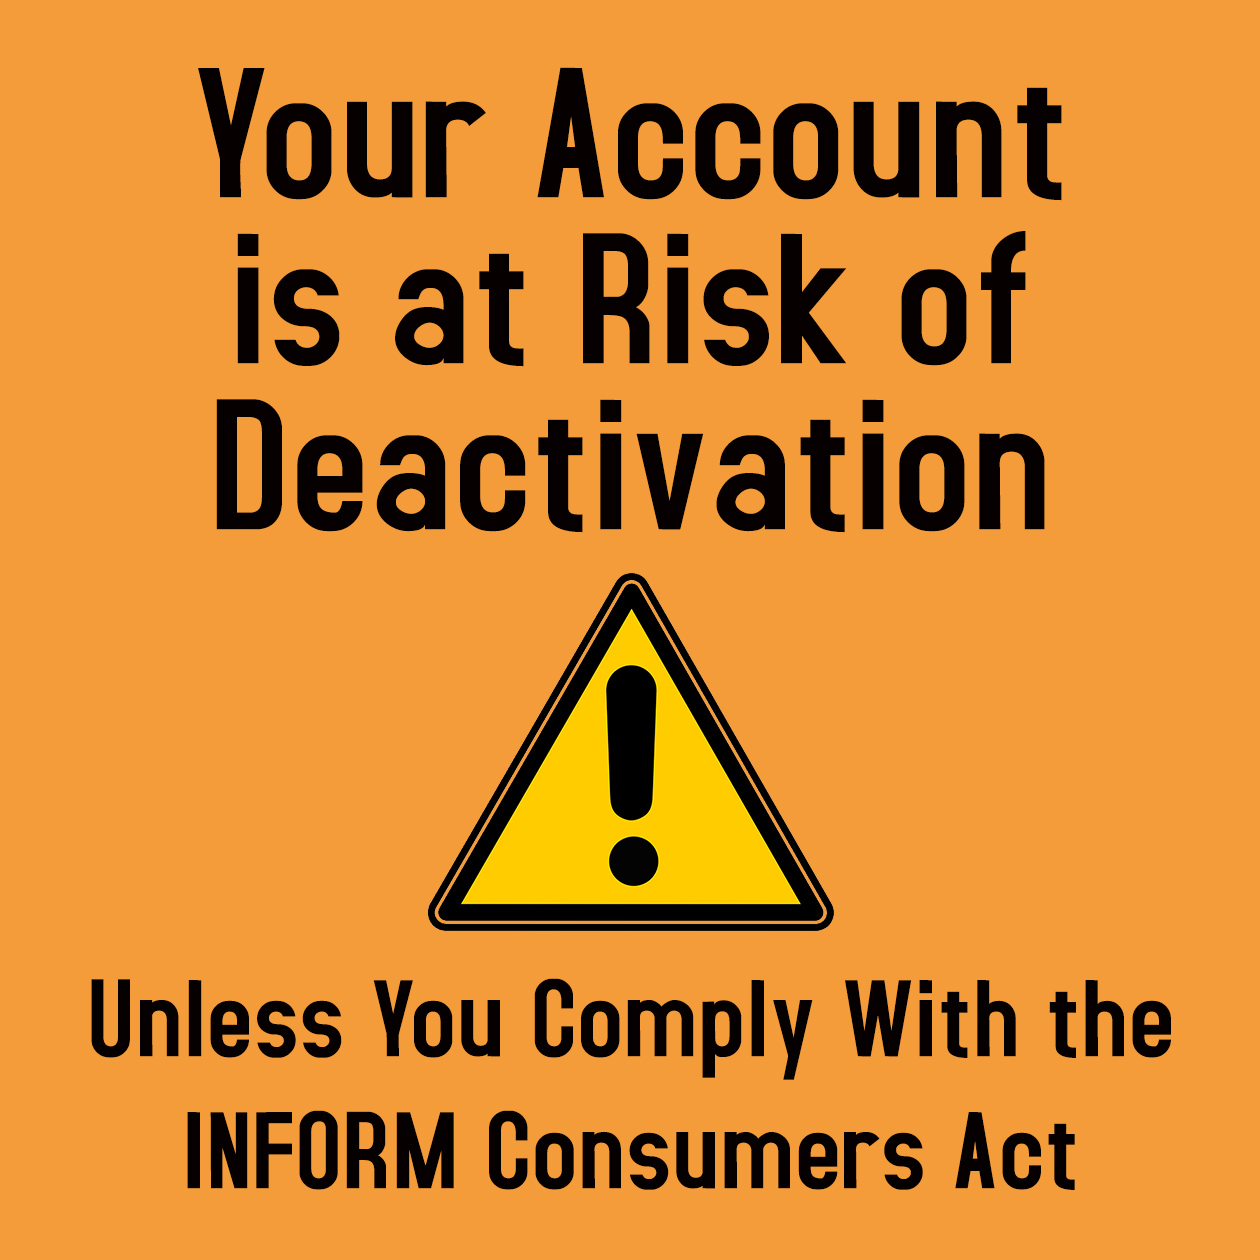 Your Account is at Danger of Deactivation Except You Comply With the INFORM Customers Act